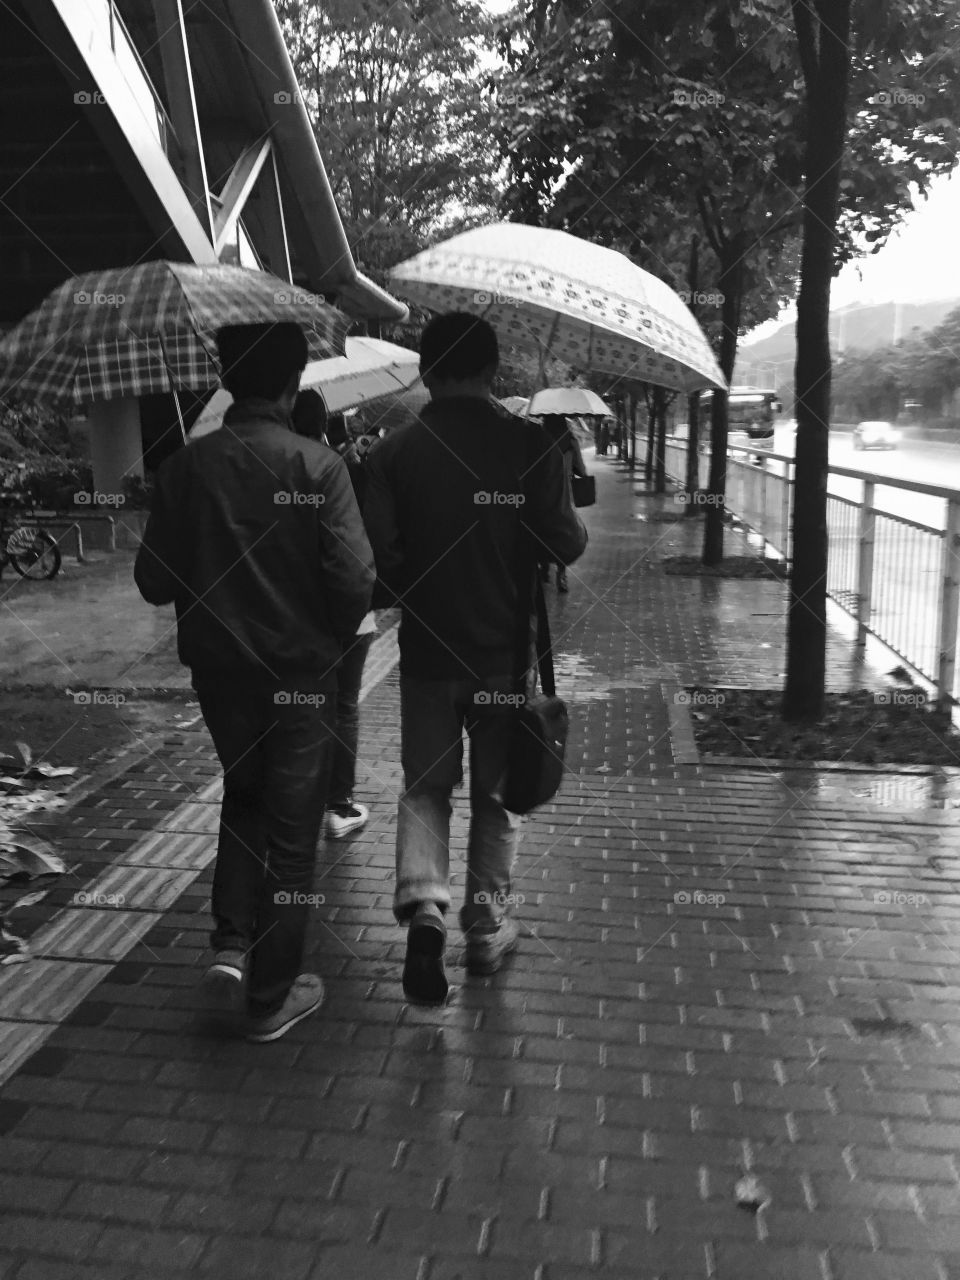 Commuters Walking with Umbrellas in the Rain - Shenzhen, China